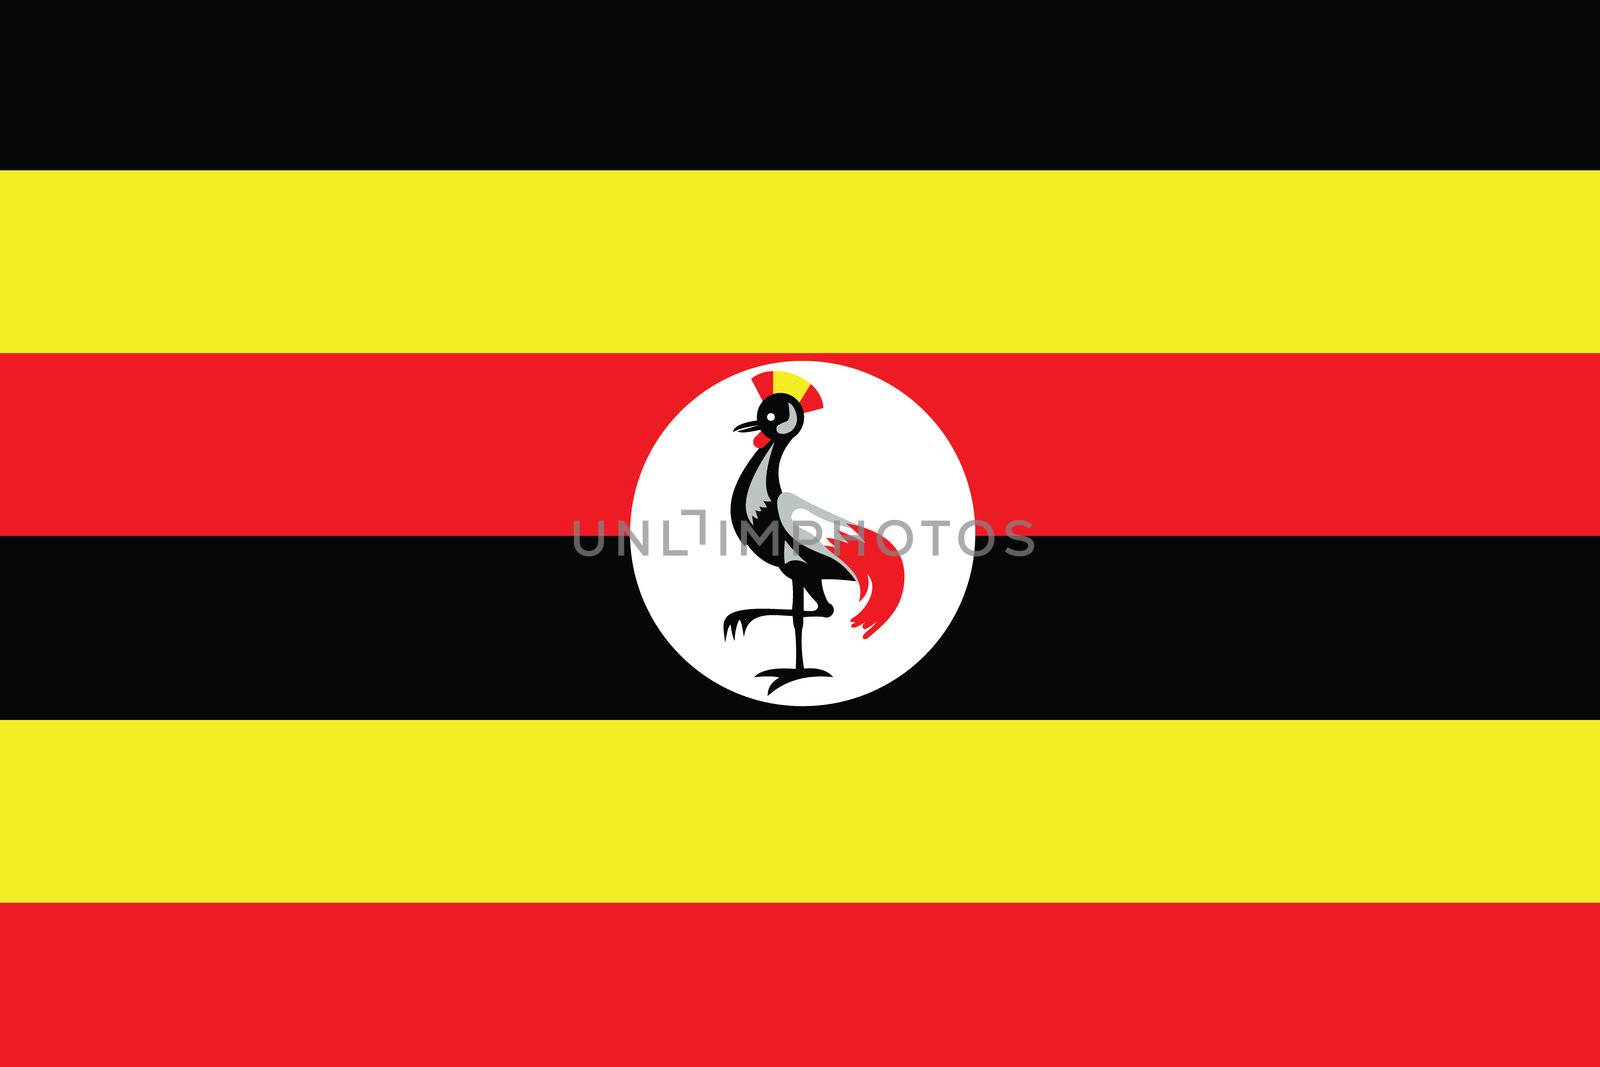 An Illustrated Drawing of the flag of Uganda